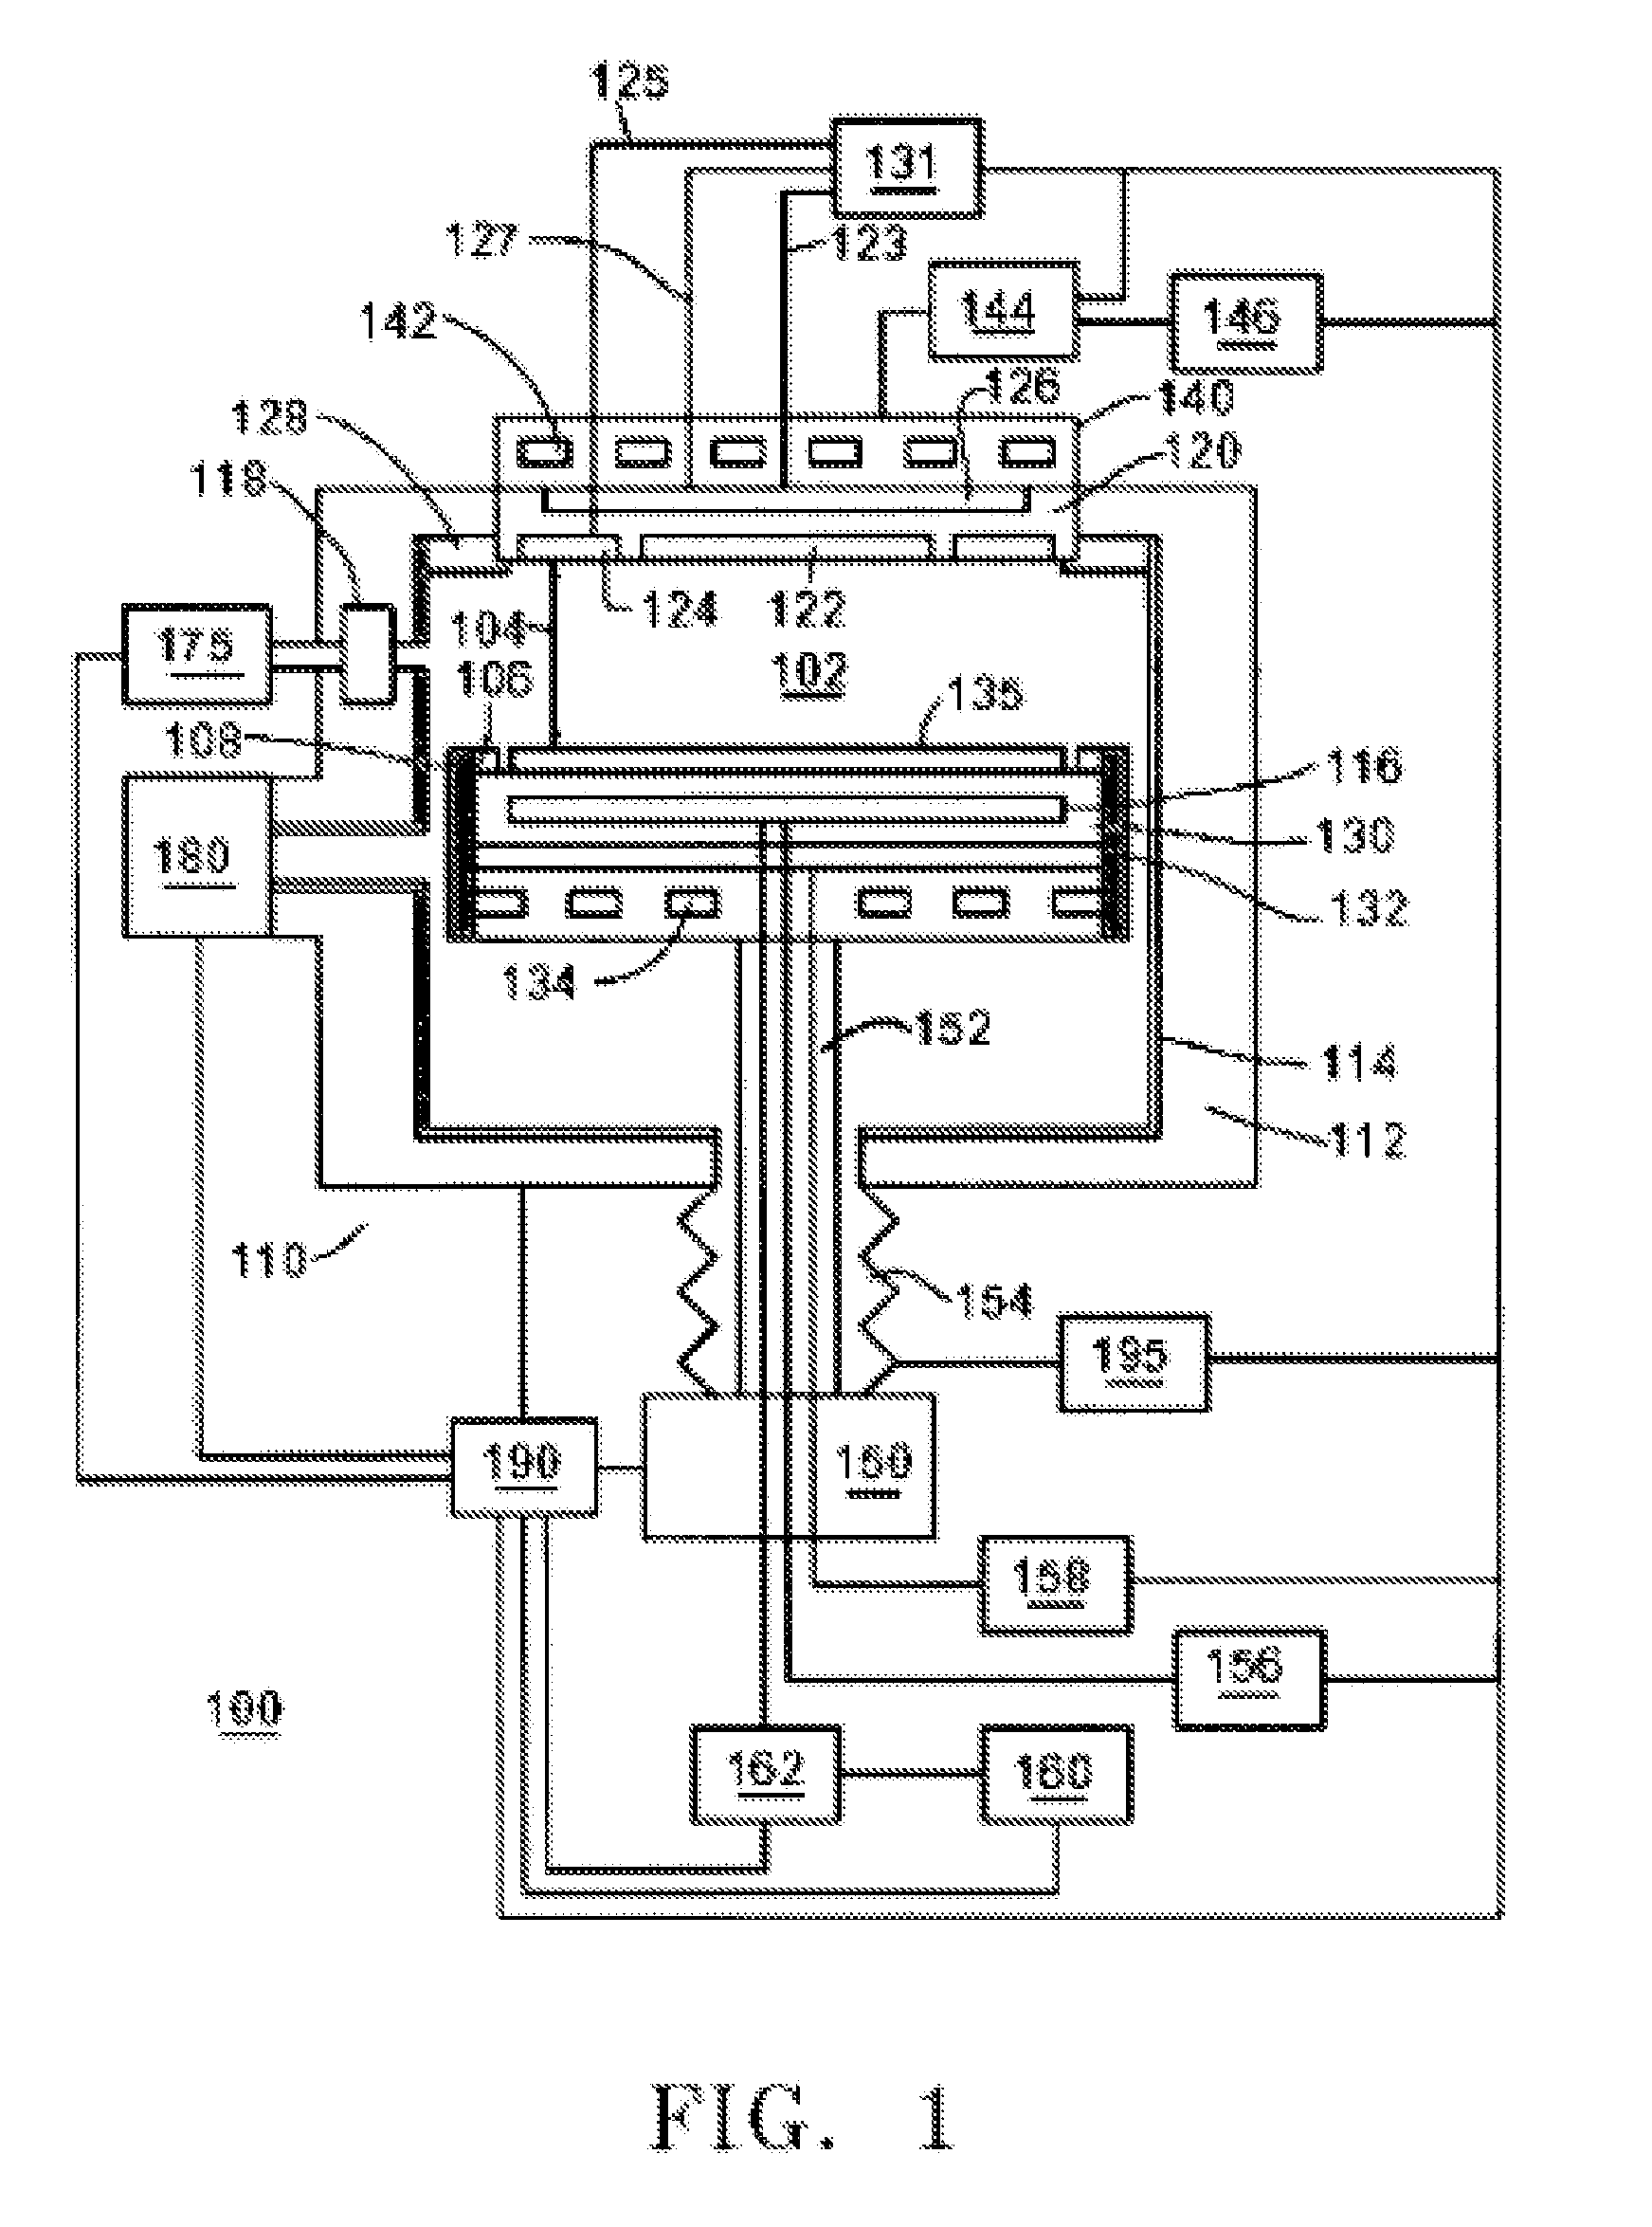 System for improving the wafer to wafer uniformity and defectivity of a deposited dielectric film